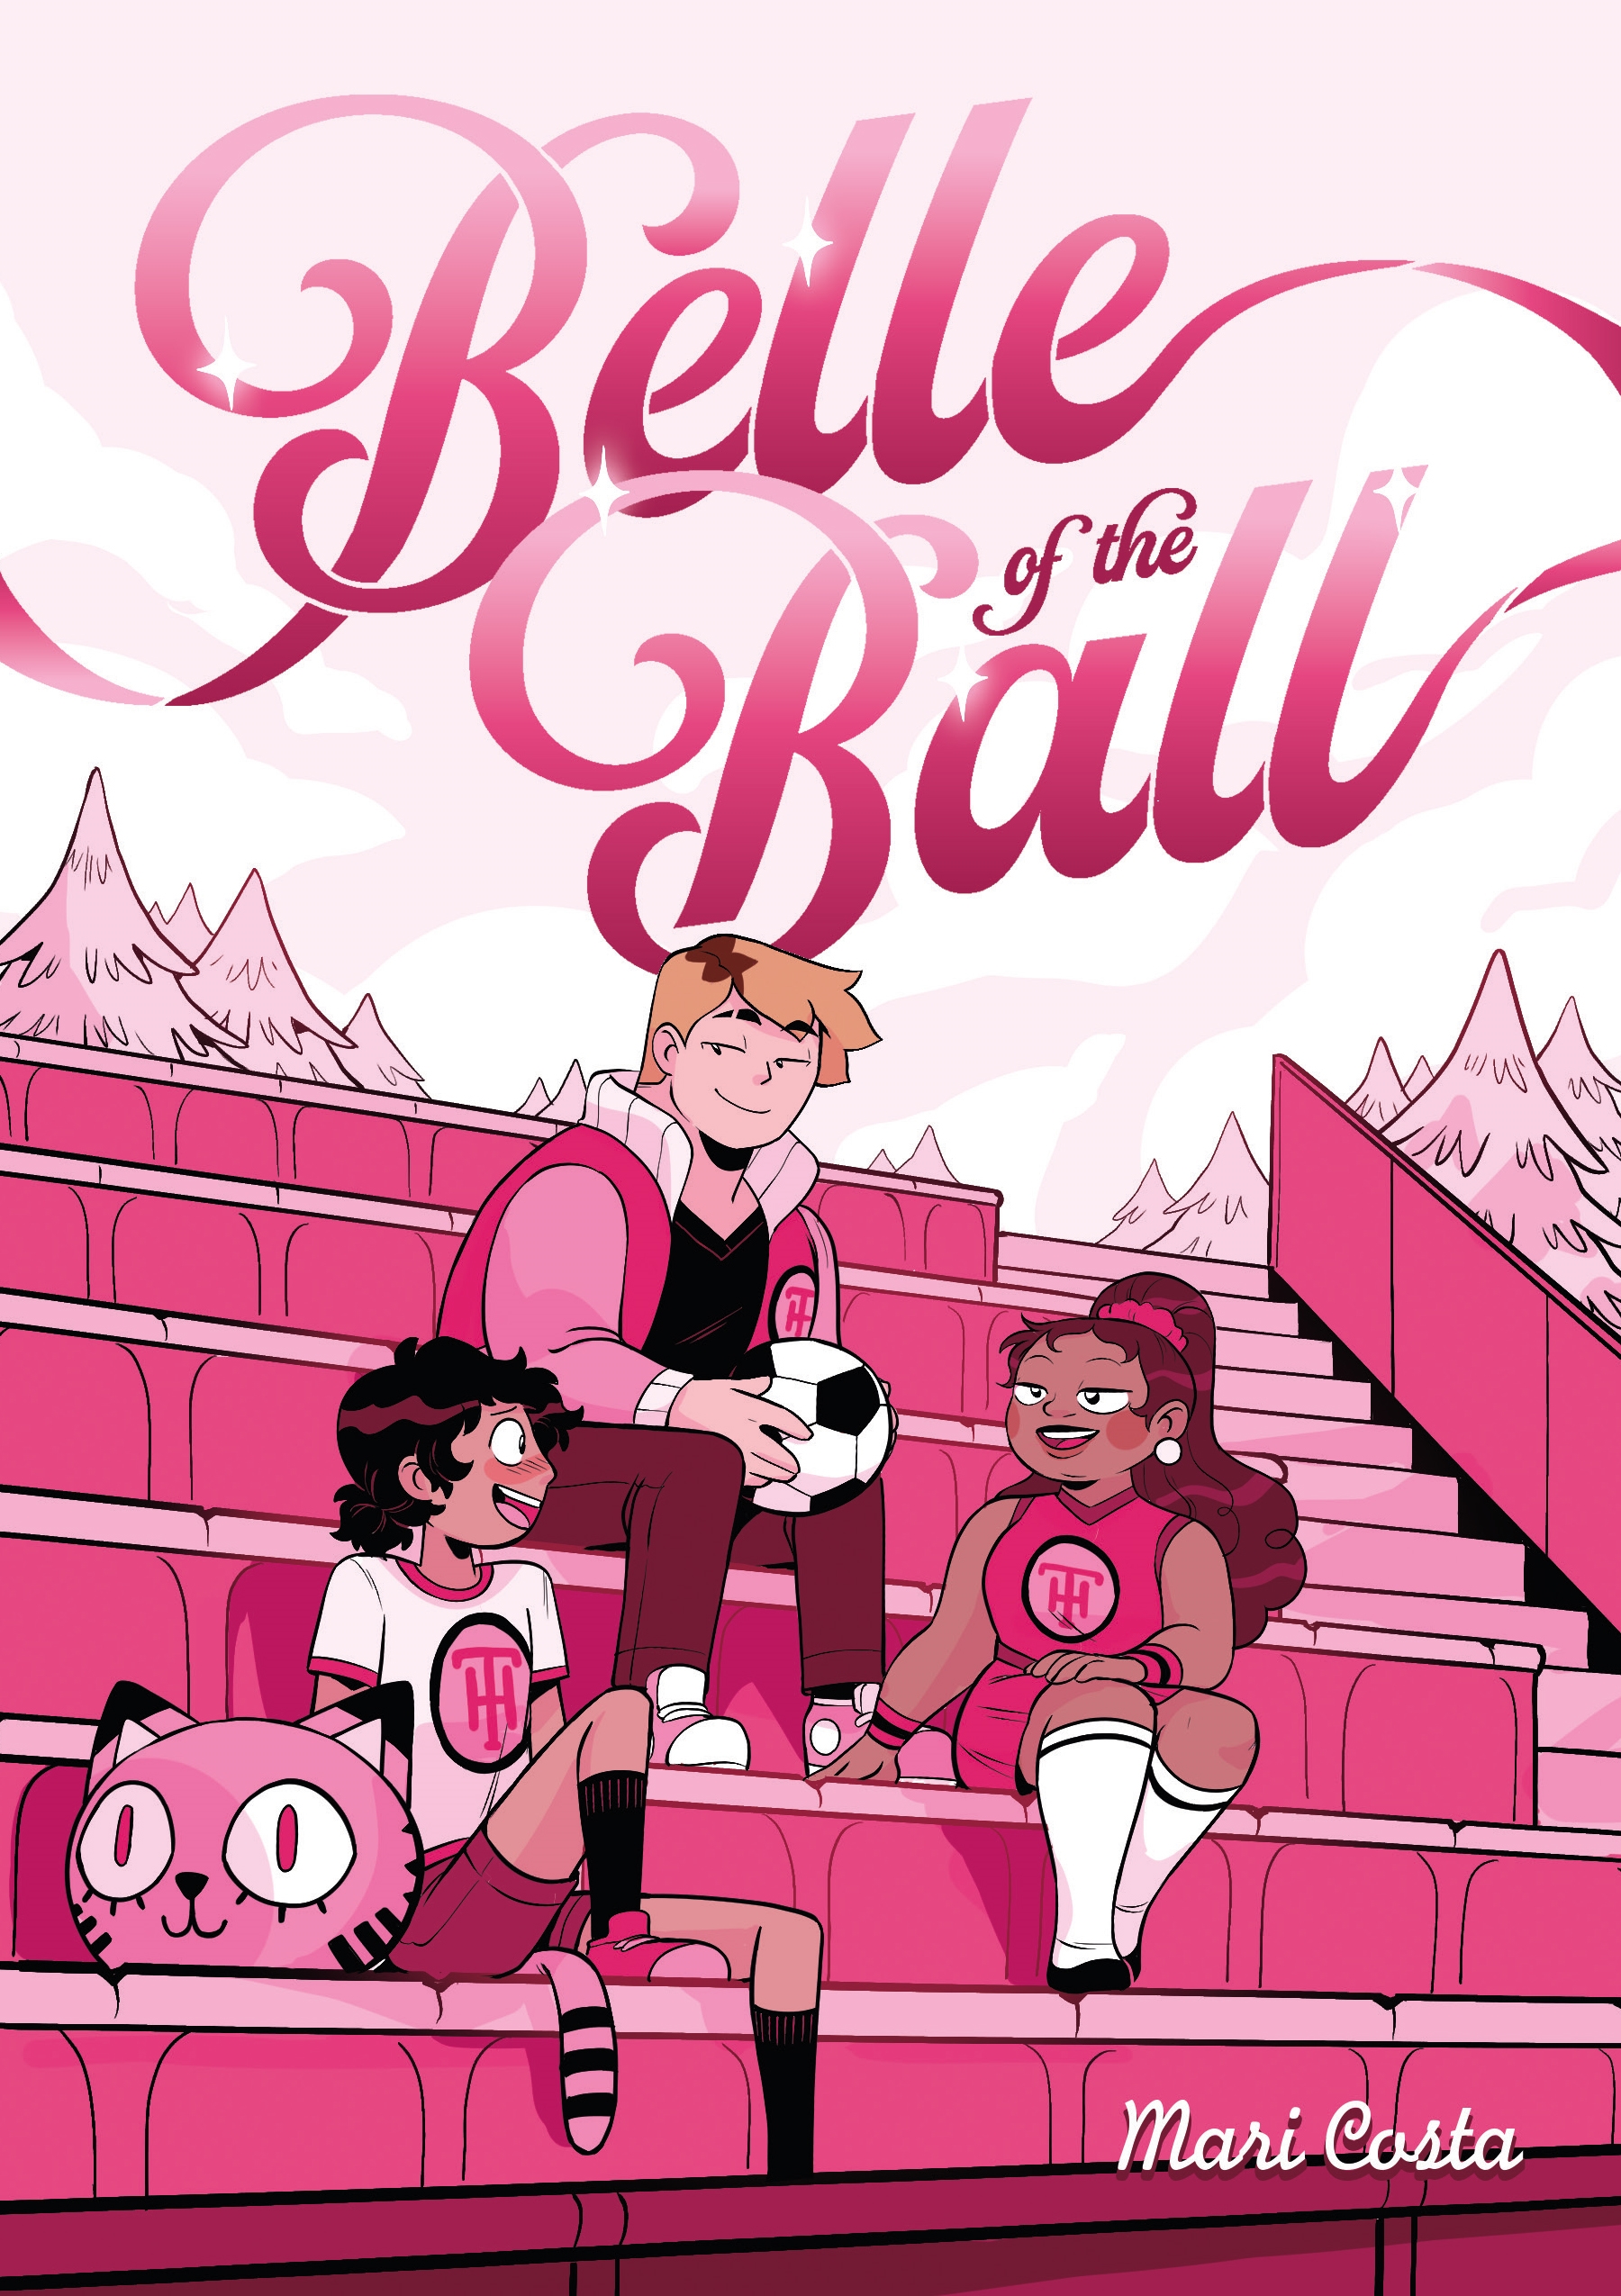 Book Belle of the Ball